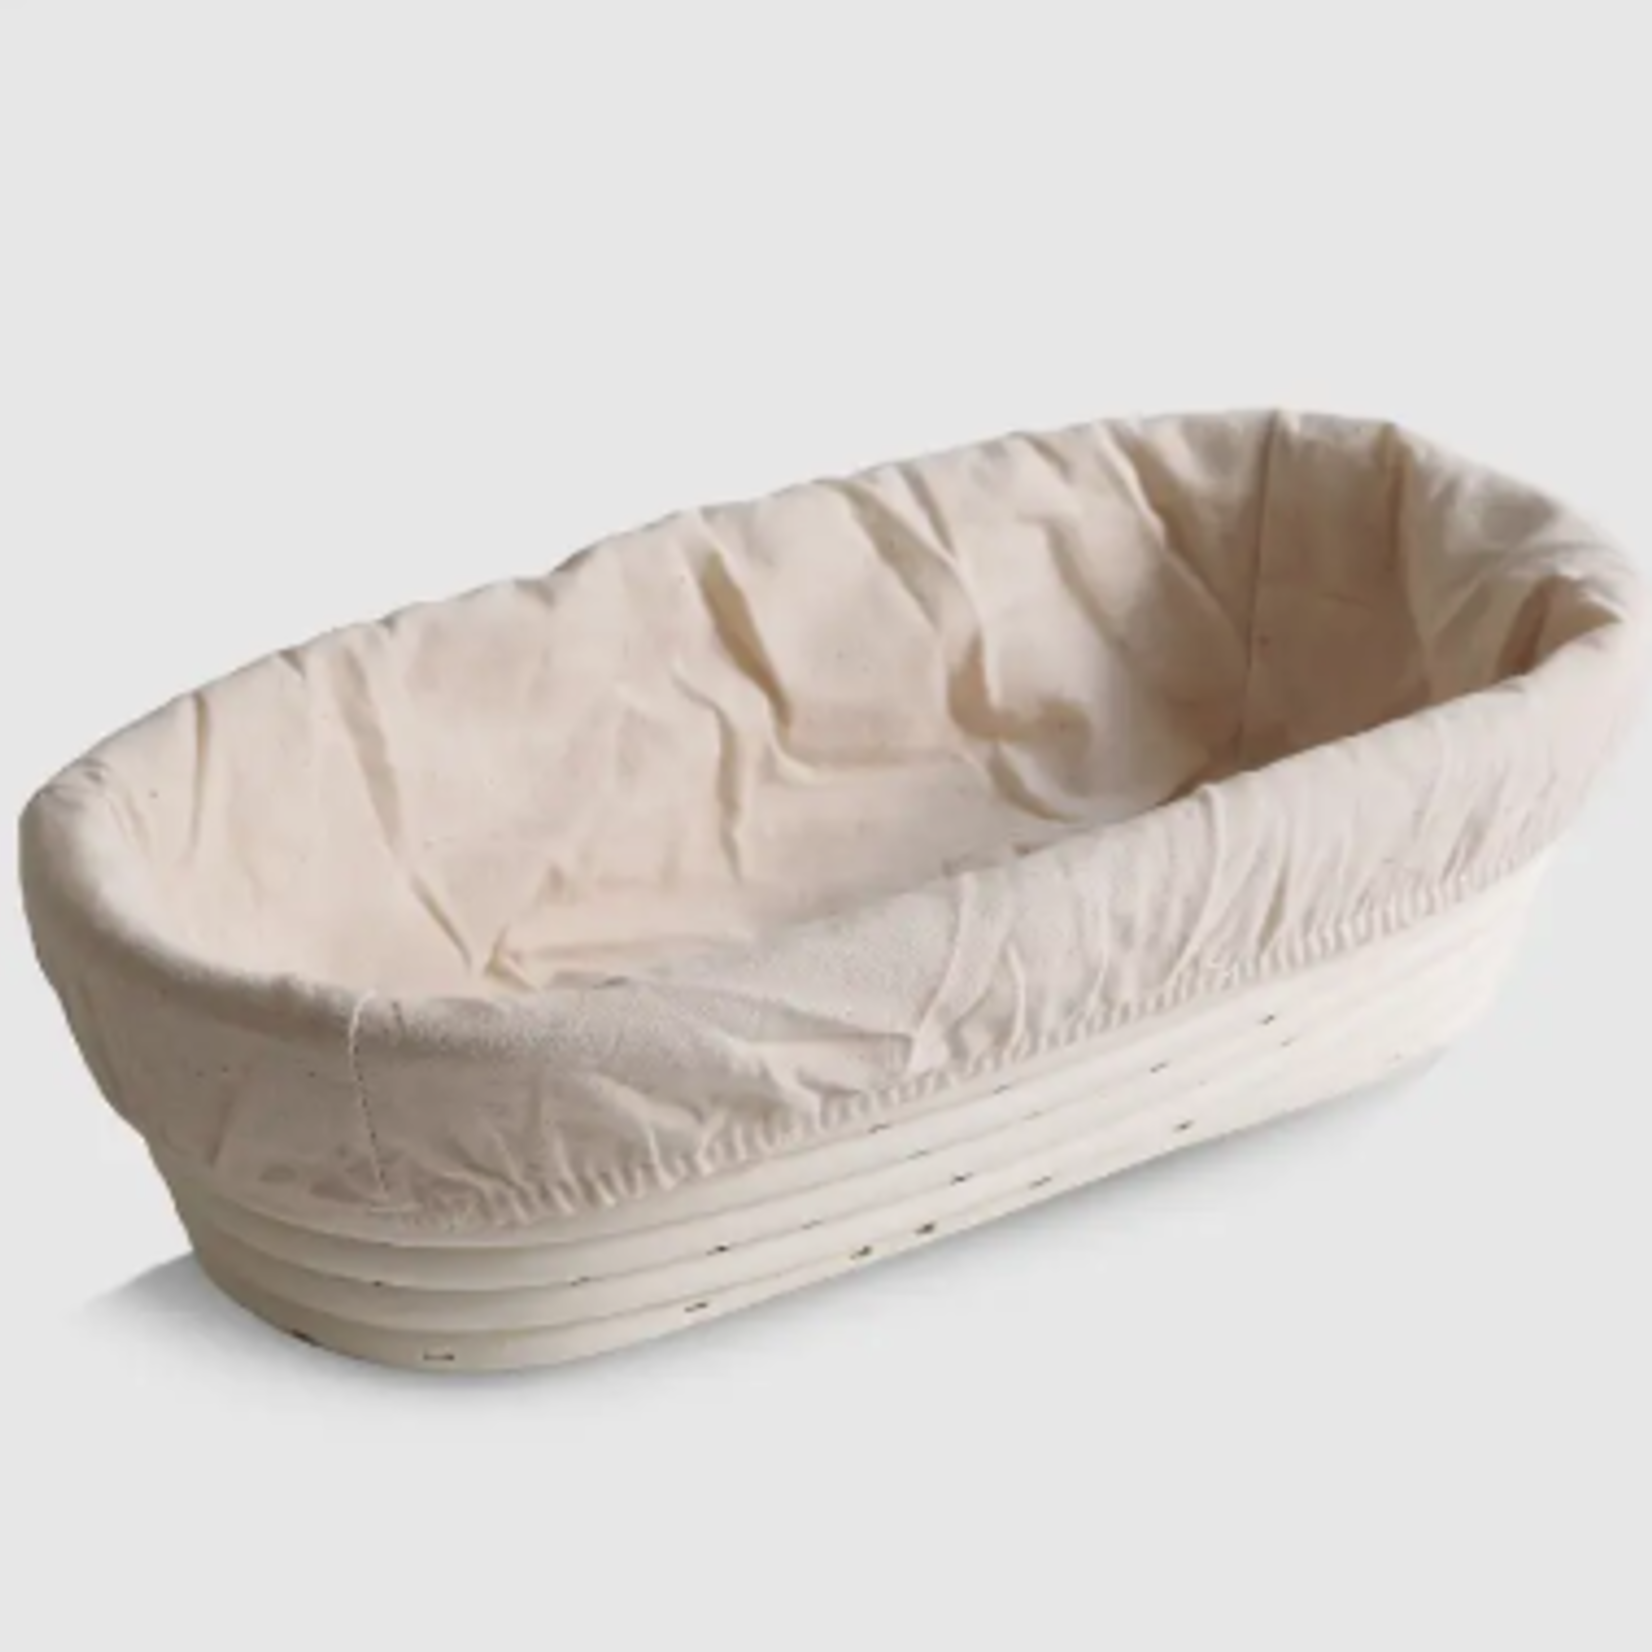 Breadtopia Oblong Proofing Basket and Liner